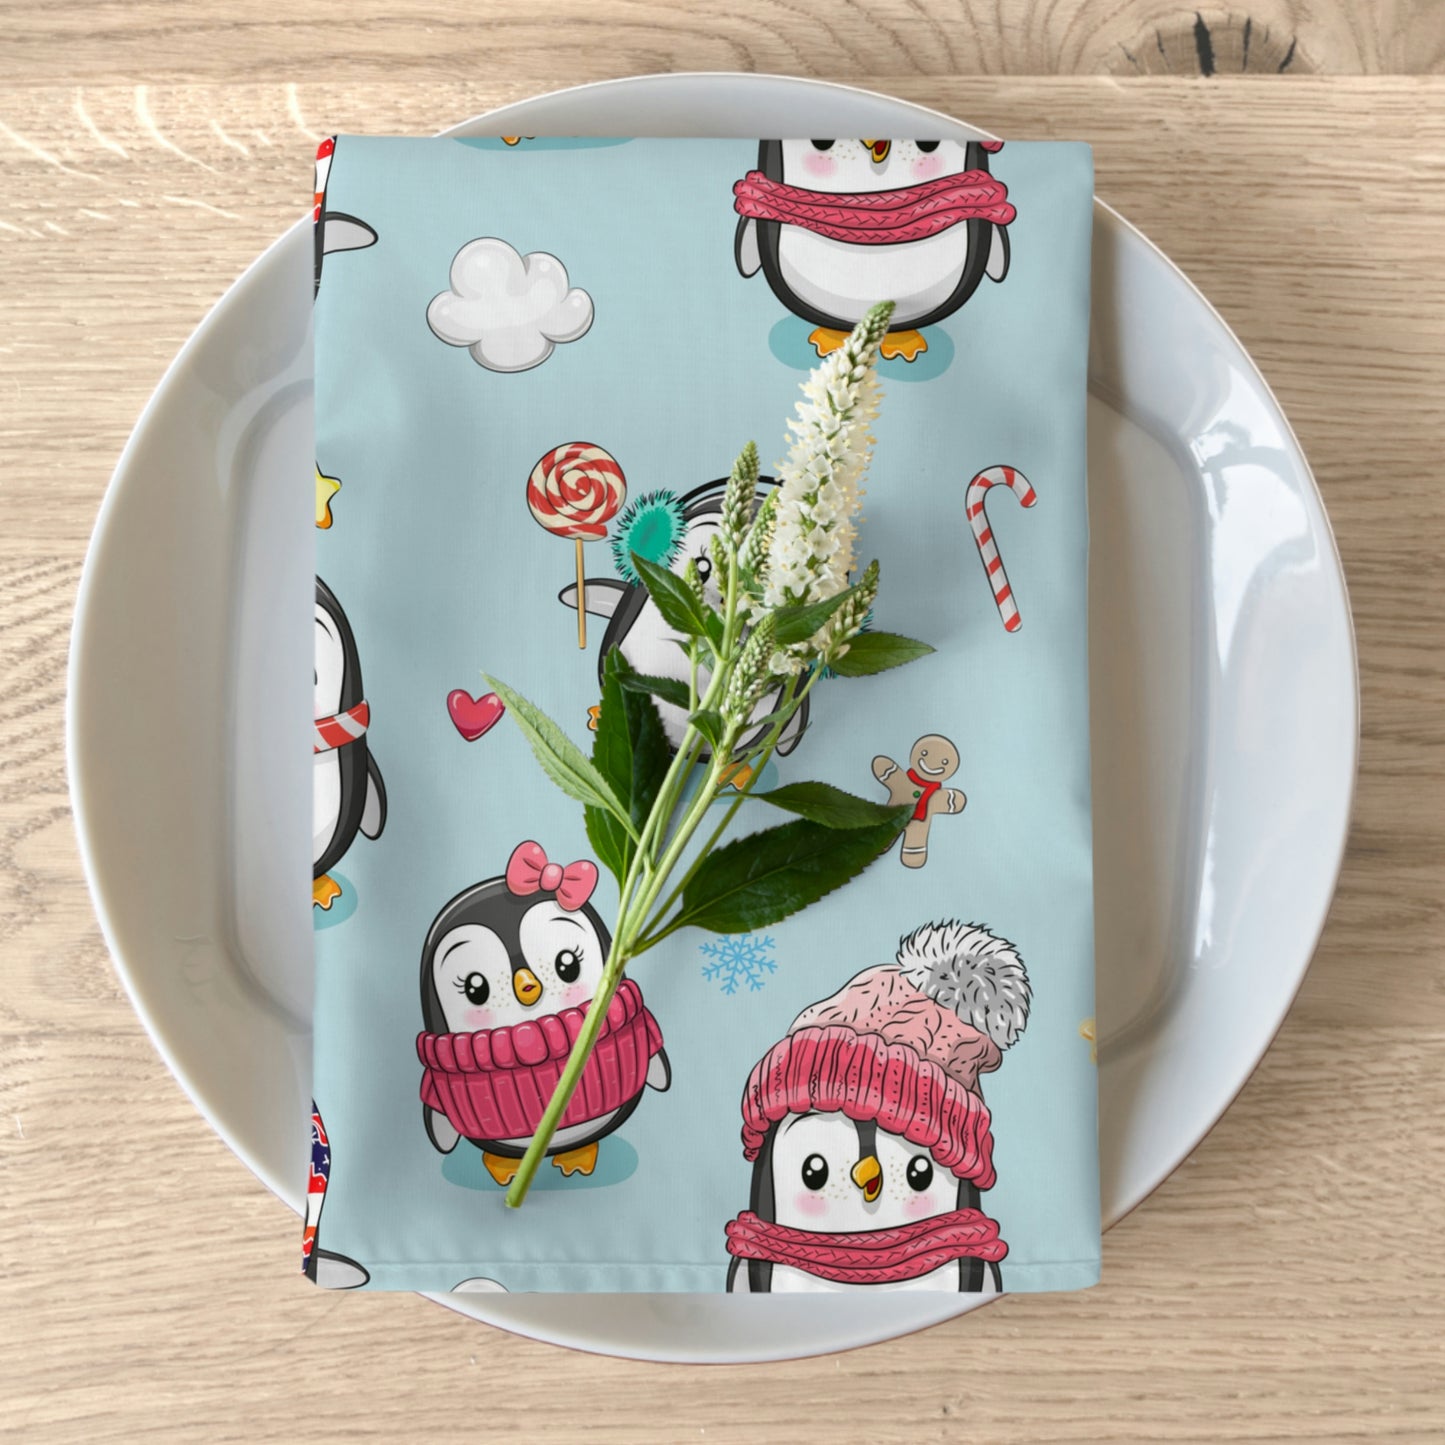 Penguins in Winter Clothes Napkins